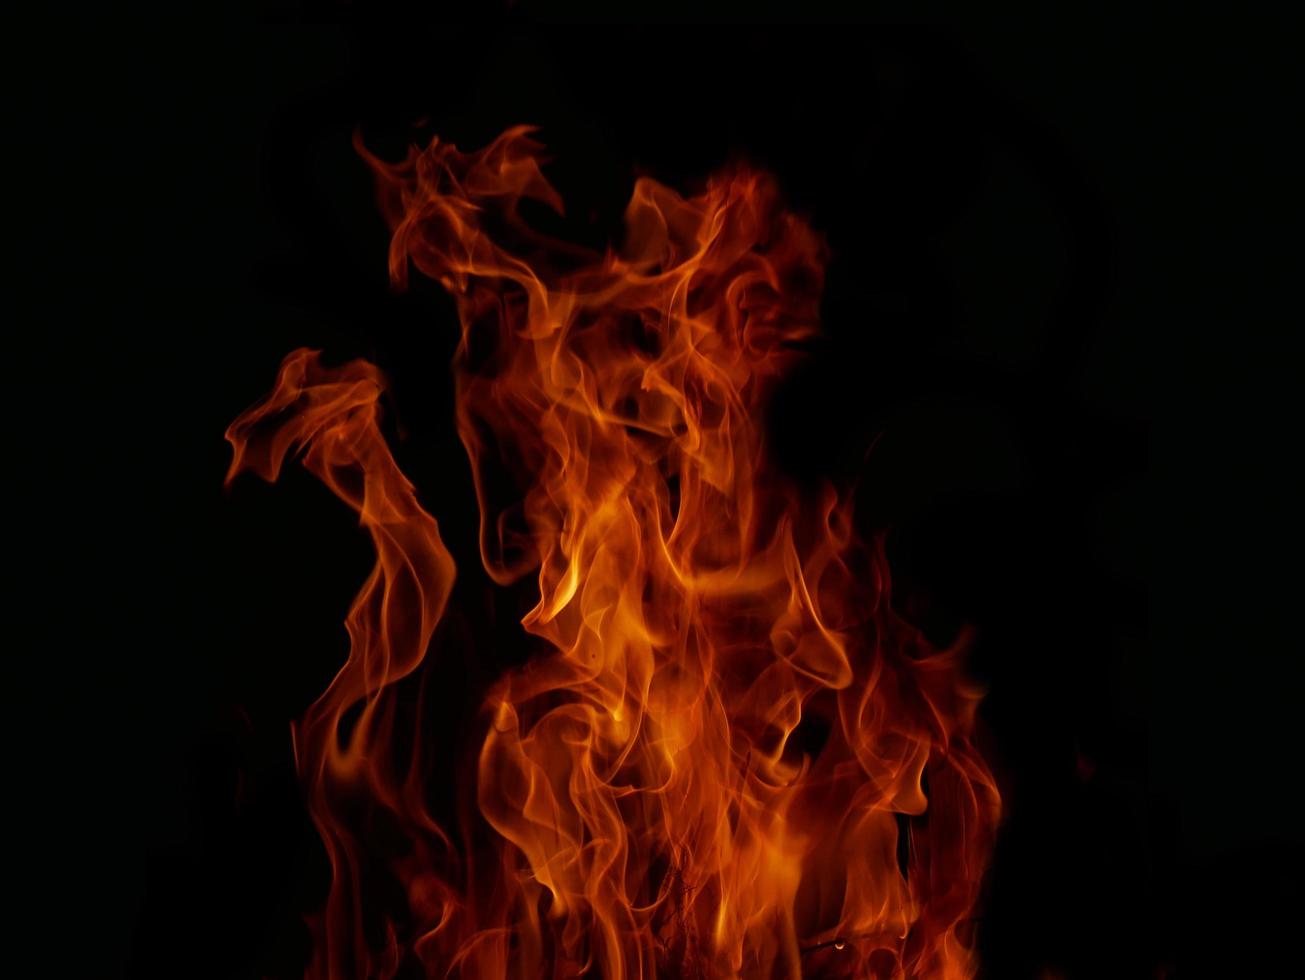 Flame Flame Texture For Strange Shape Fire Background Flame meat that is burned from the stove or from cooking. danger feeling abstract black background Suitable for banners or advertisements. photo